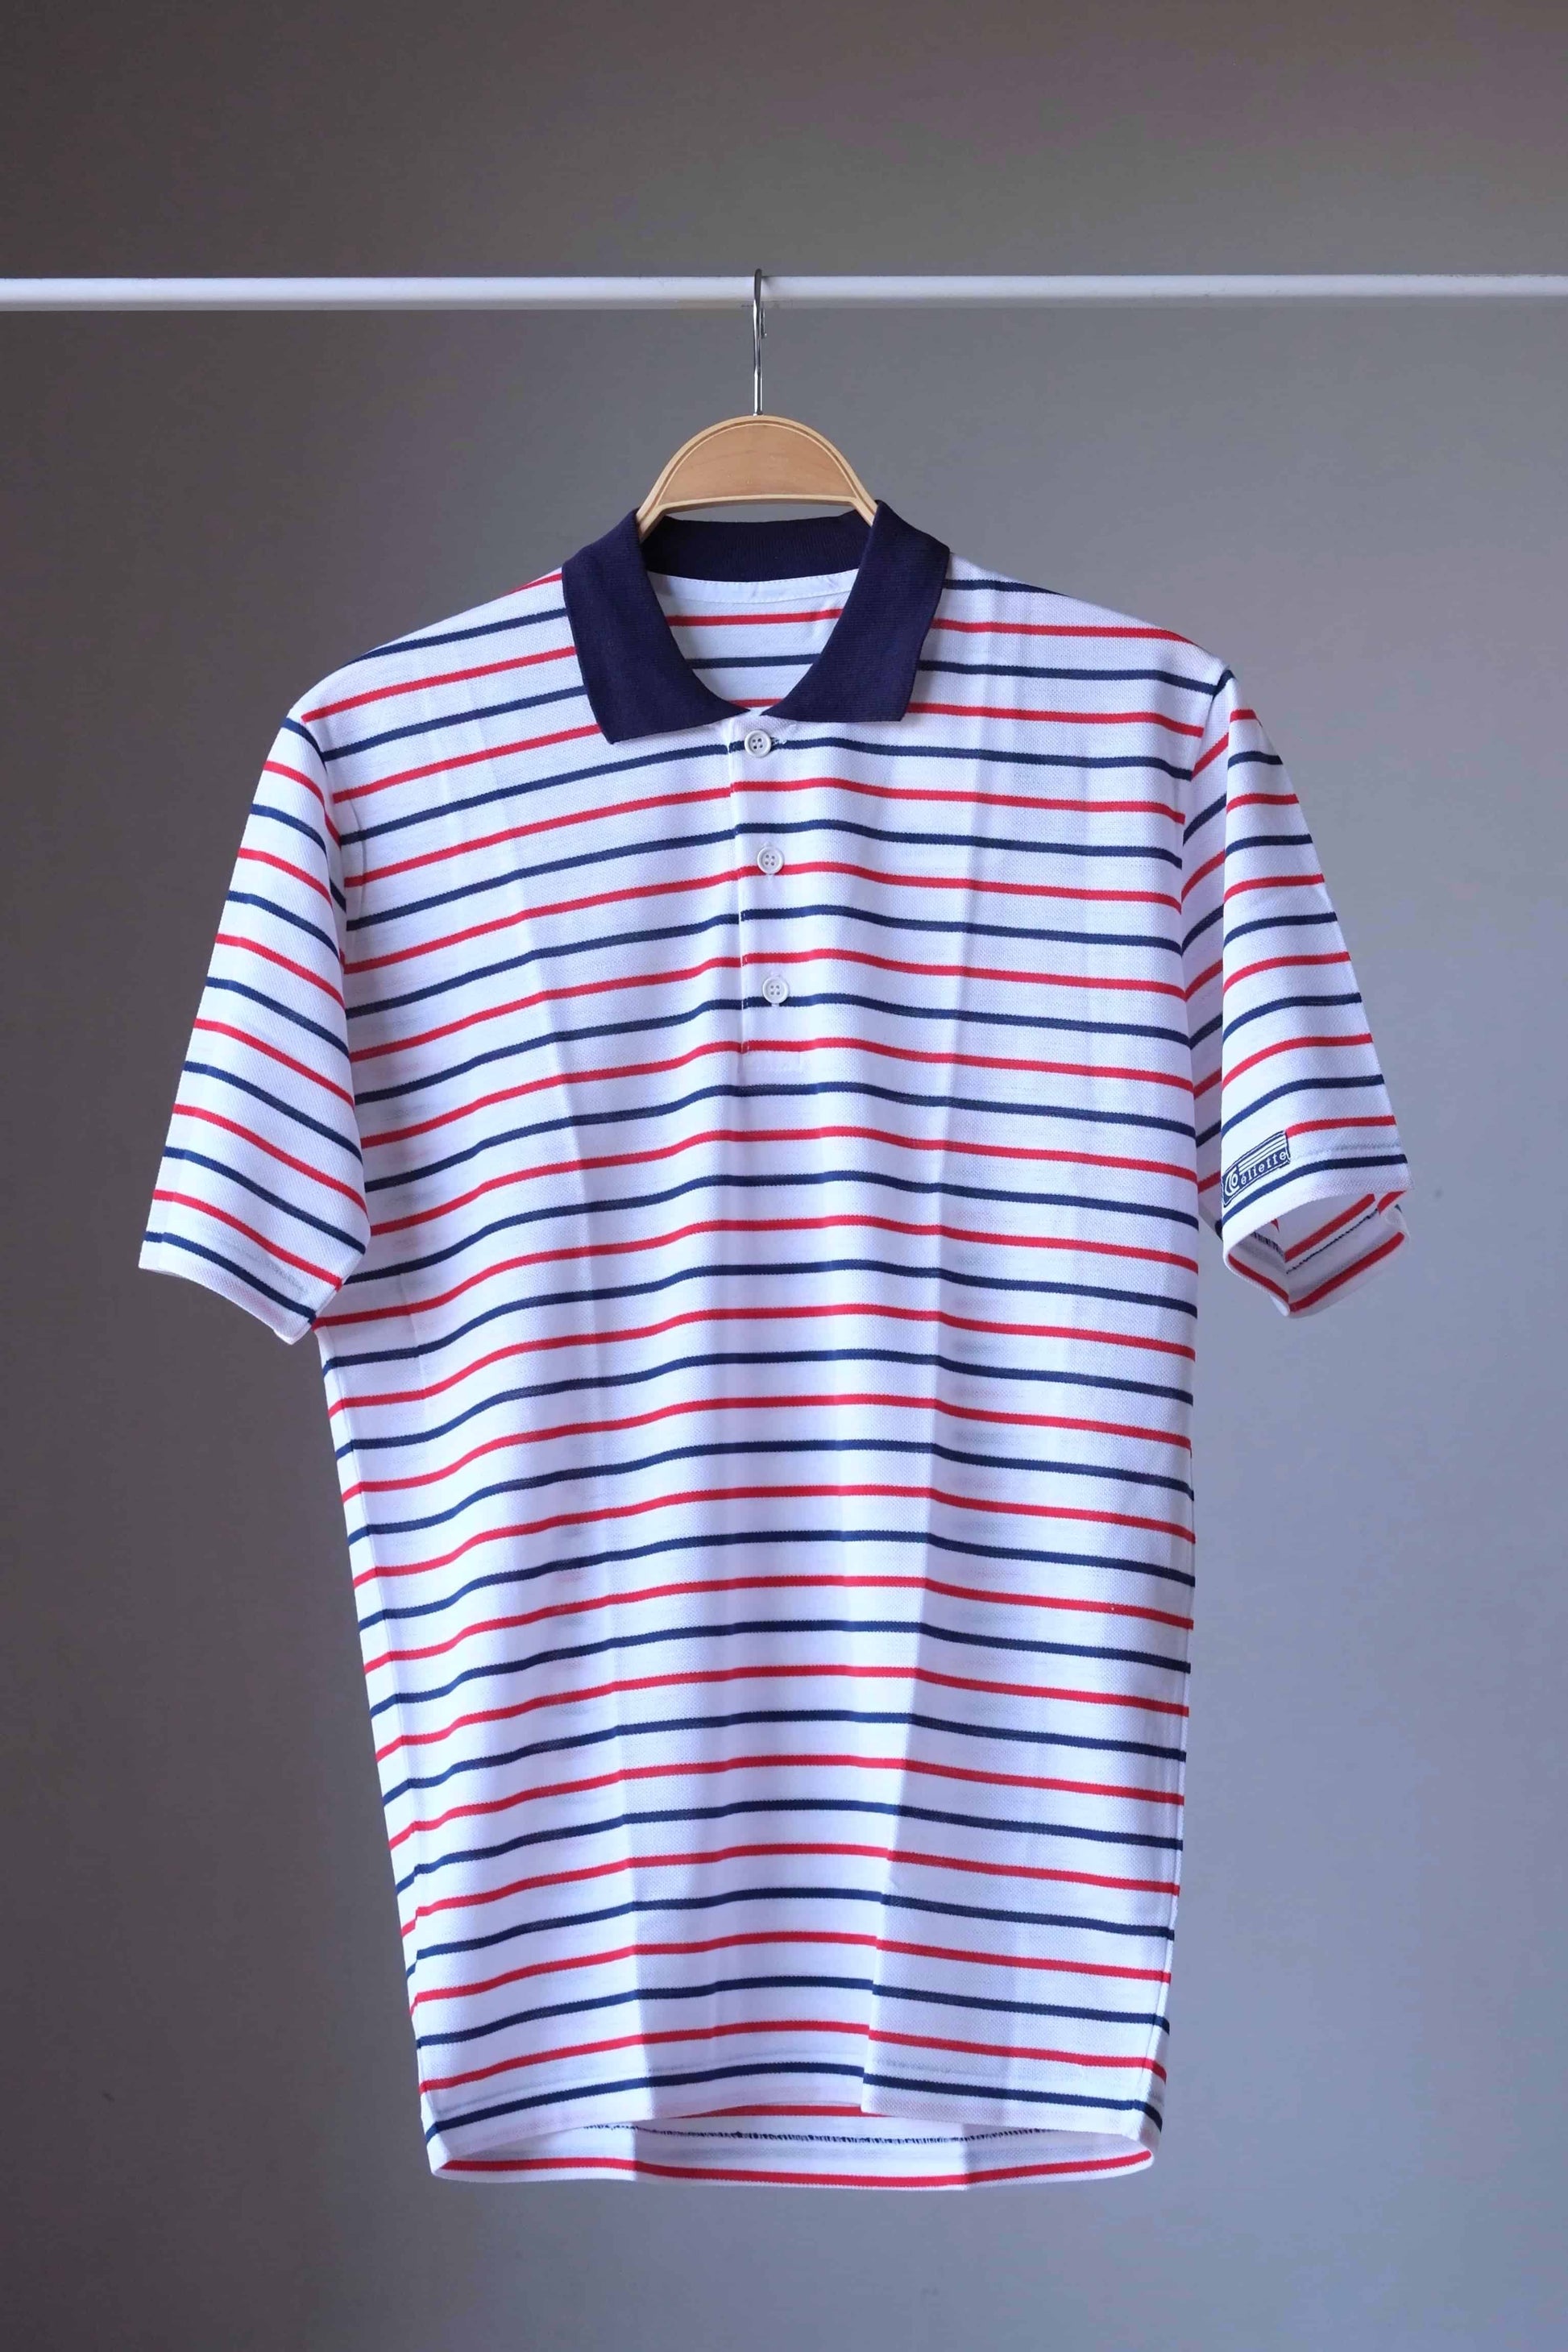 80's Tennis Striped Polo red navy